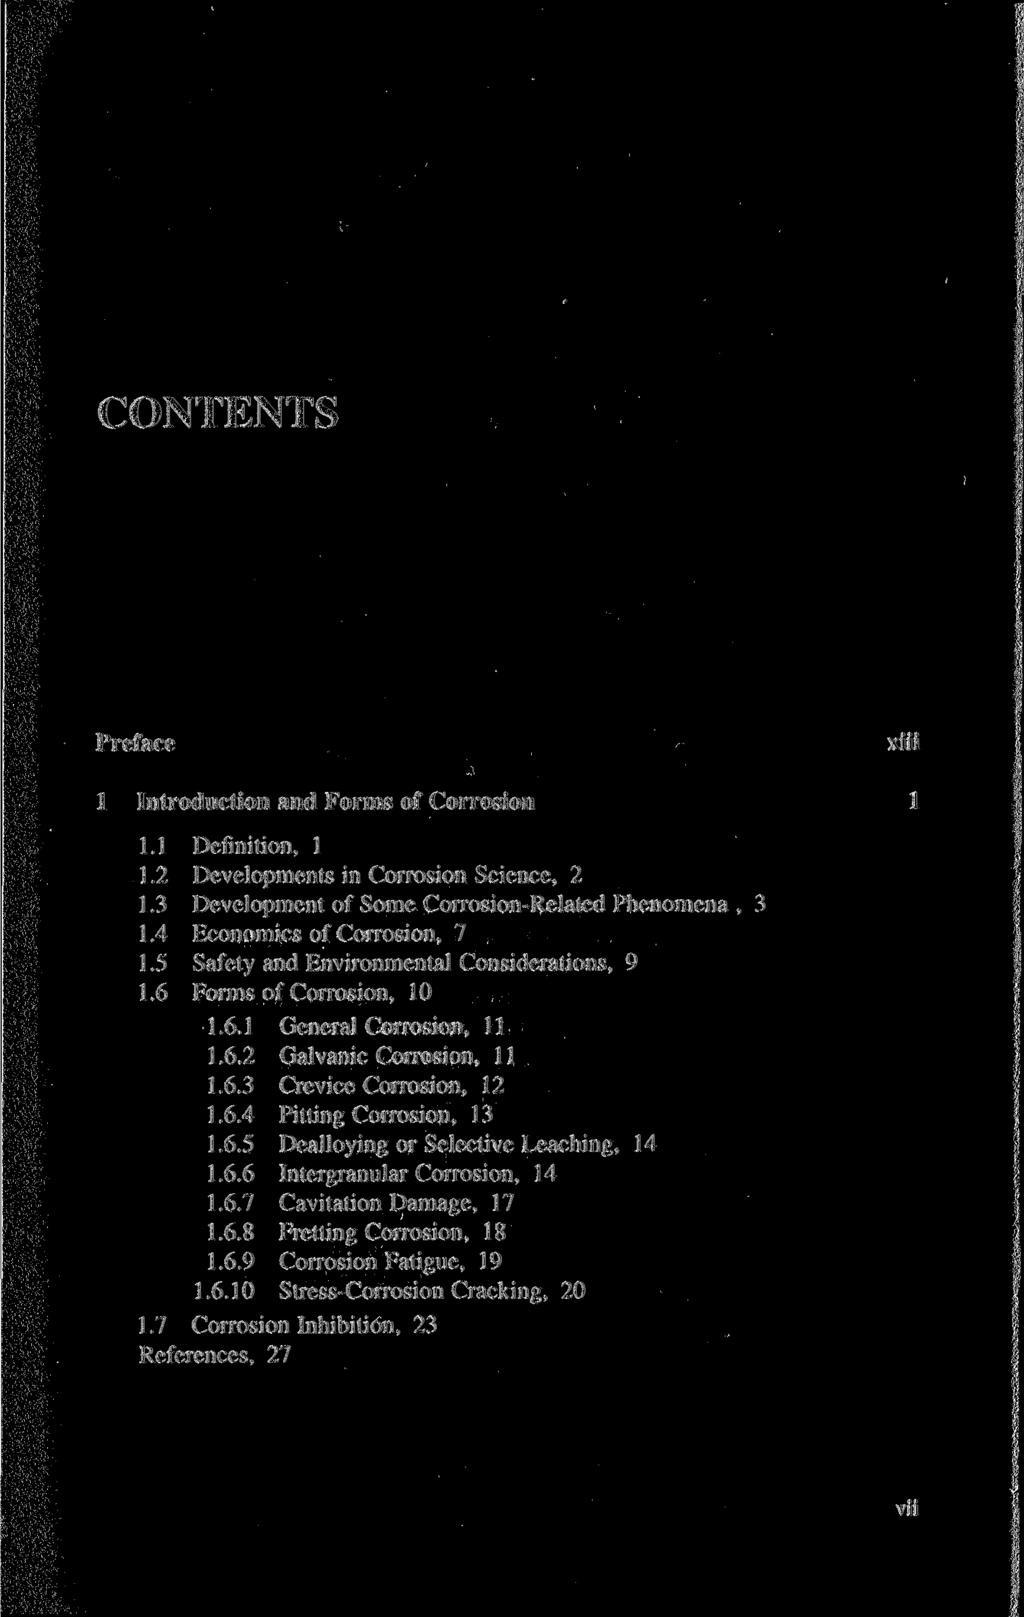 CONTENTS Preface 1 Introduction and Forms of Corrosion 1.1 Definition, 1 1.2 Developments in Corrosion Science, 2 1.3 Development of Some Corrosion-Related Phenomena, 3 1.